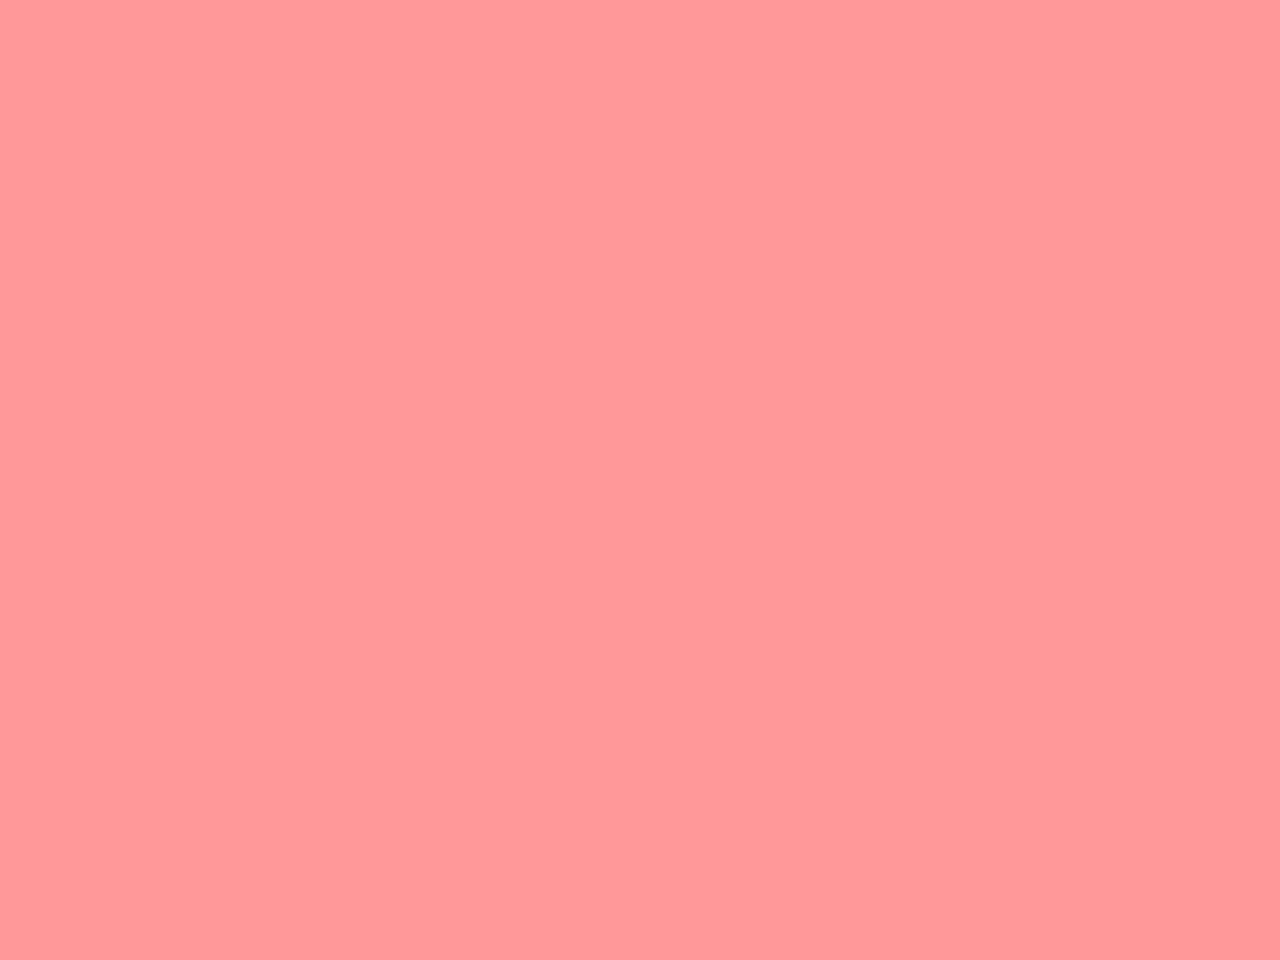 1280x960 Light Salmon Pink Solid Color Background